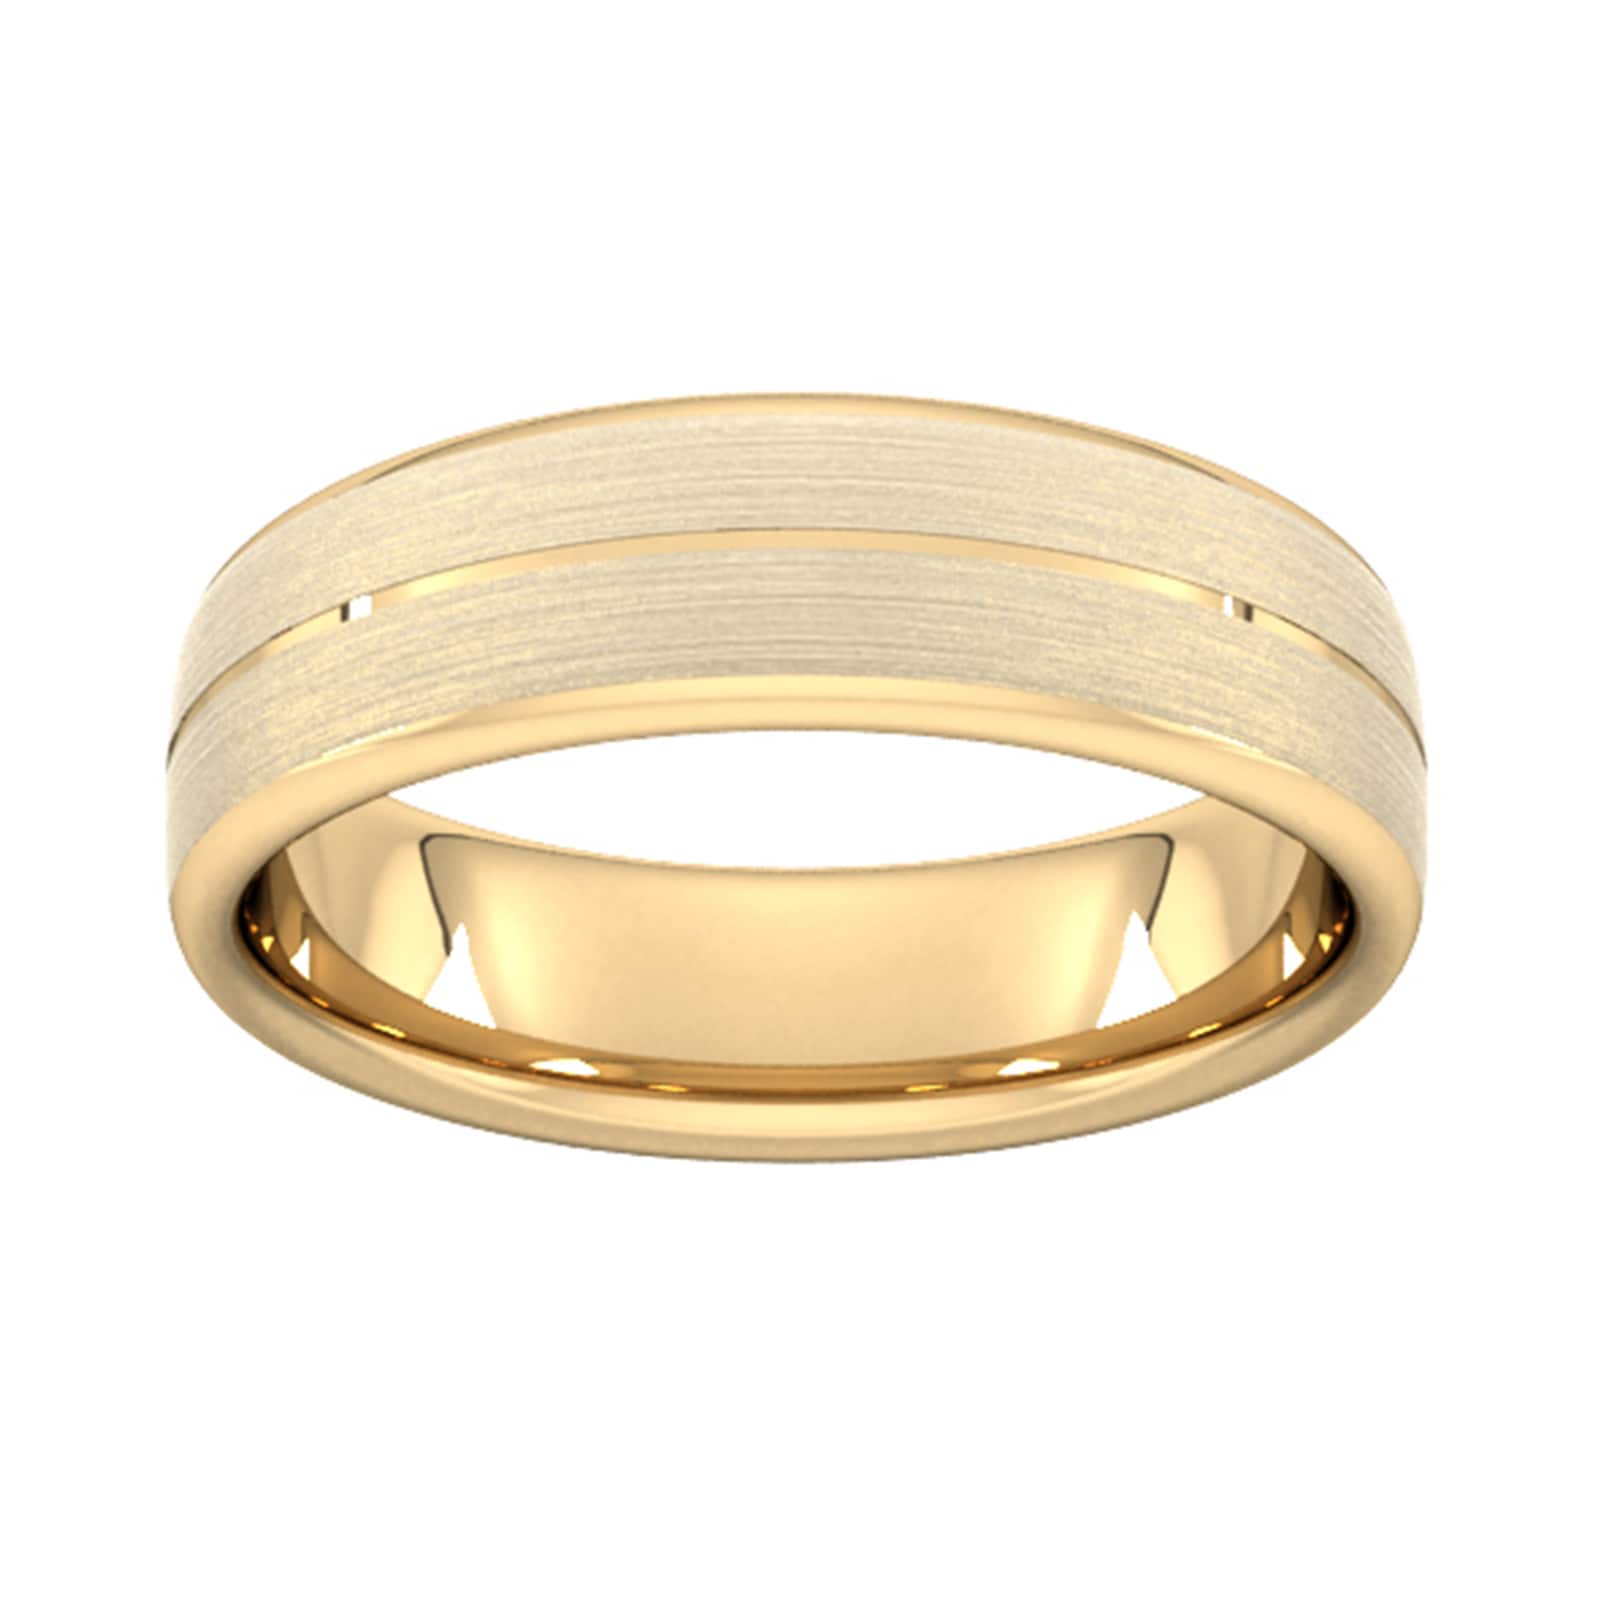 6mm Traditional Court Heavy Centre Groove With Chamfered Edge Wedding Ring In 9 Carat Yellow Gold - Ring Size U